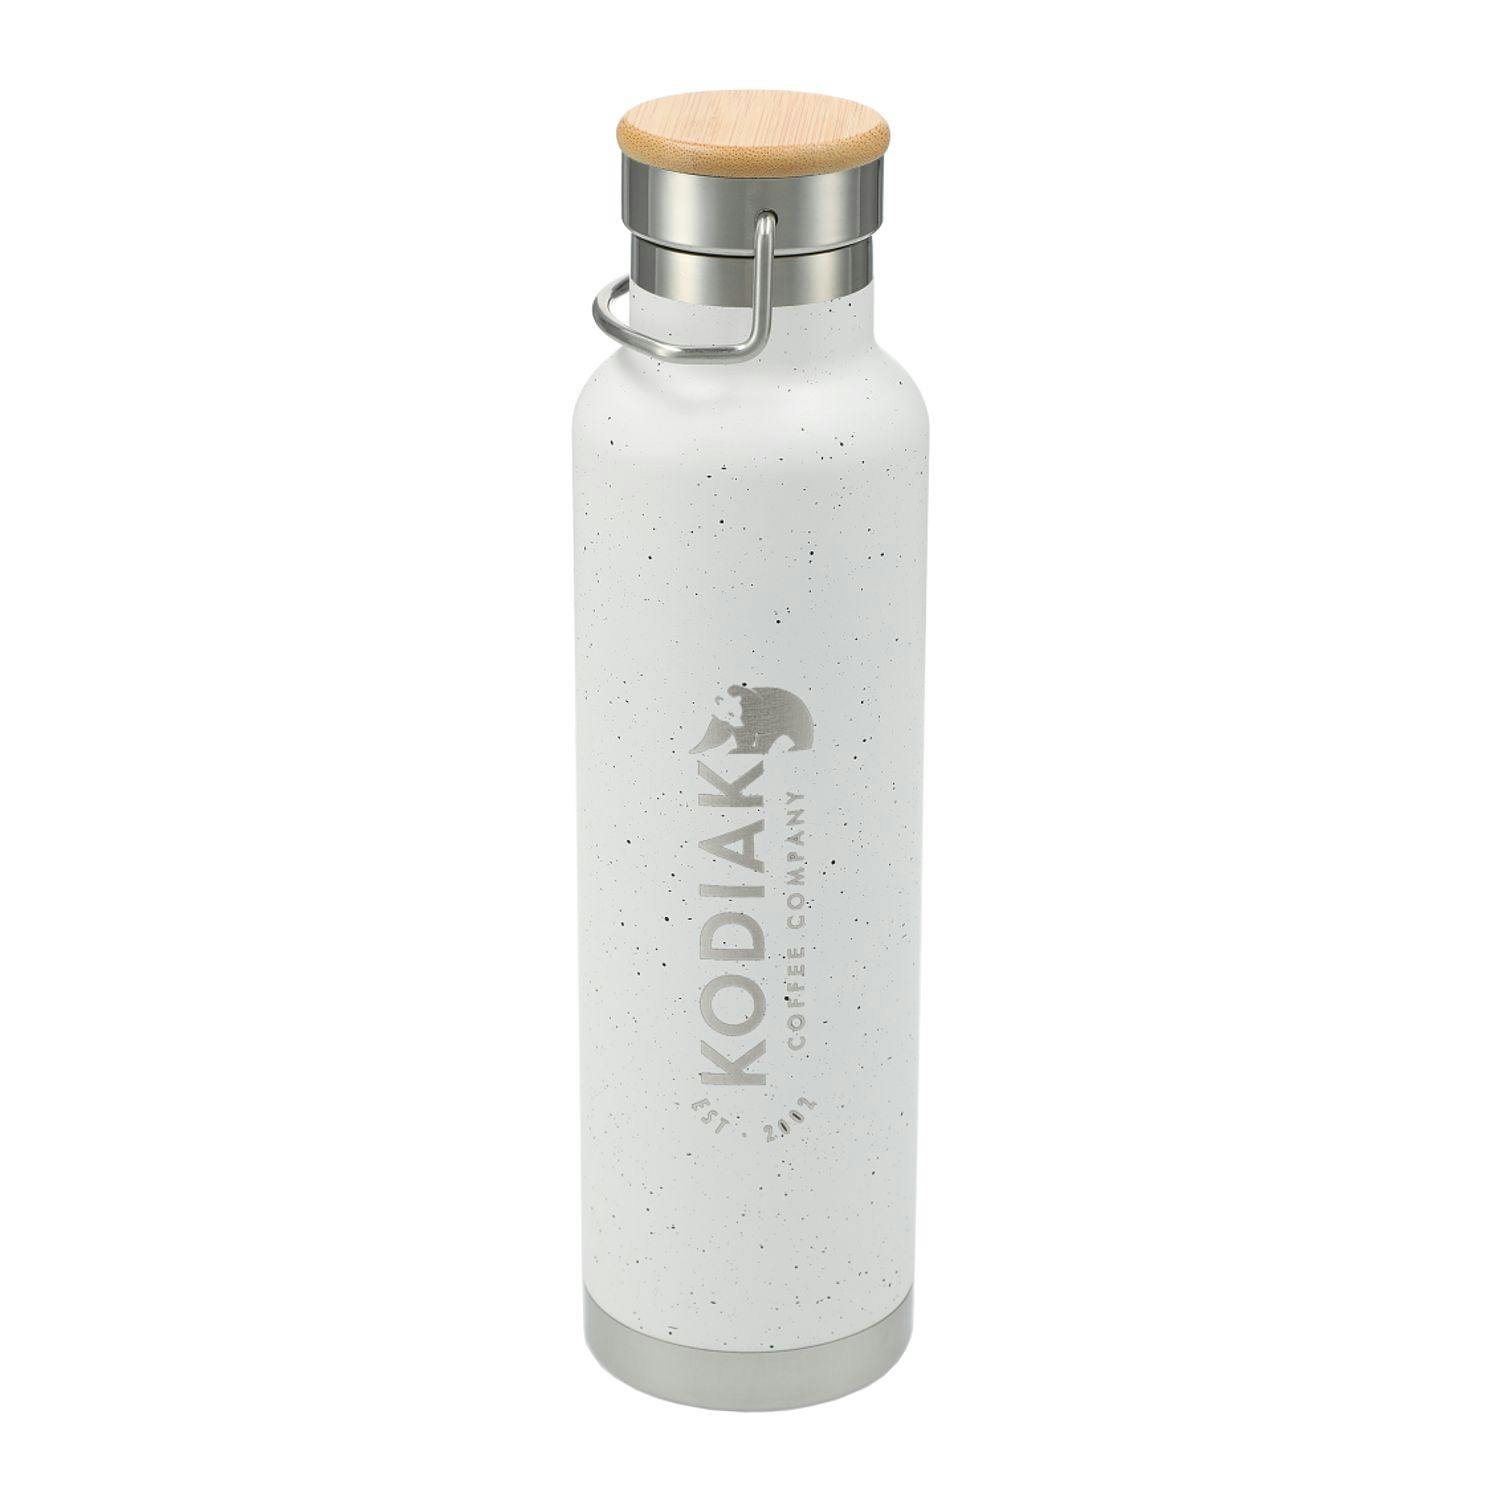 Speckled Thor Copper Vacuum Insulated Bottle 22oz - additional Image 2